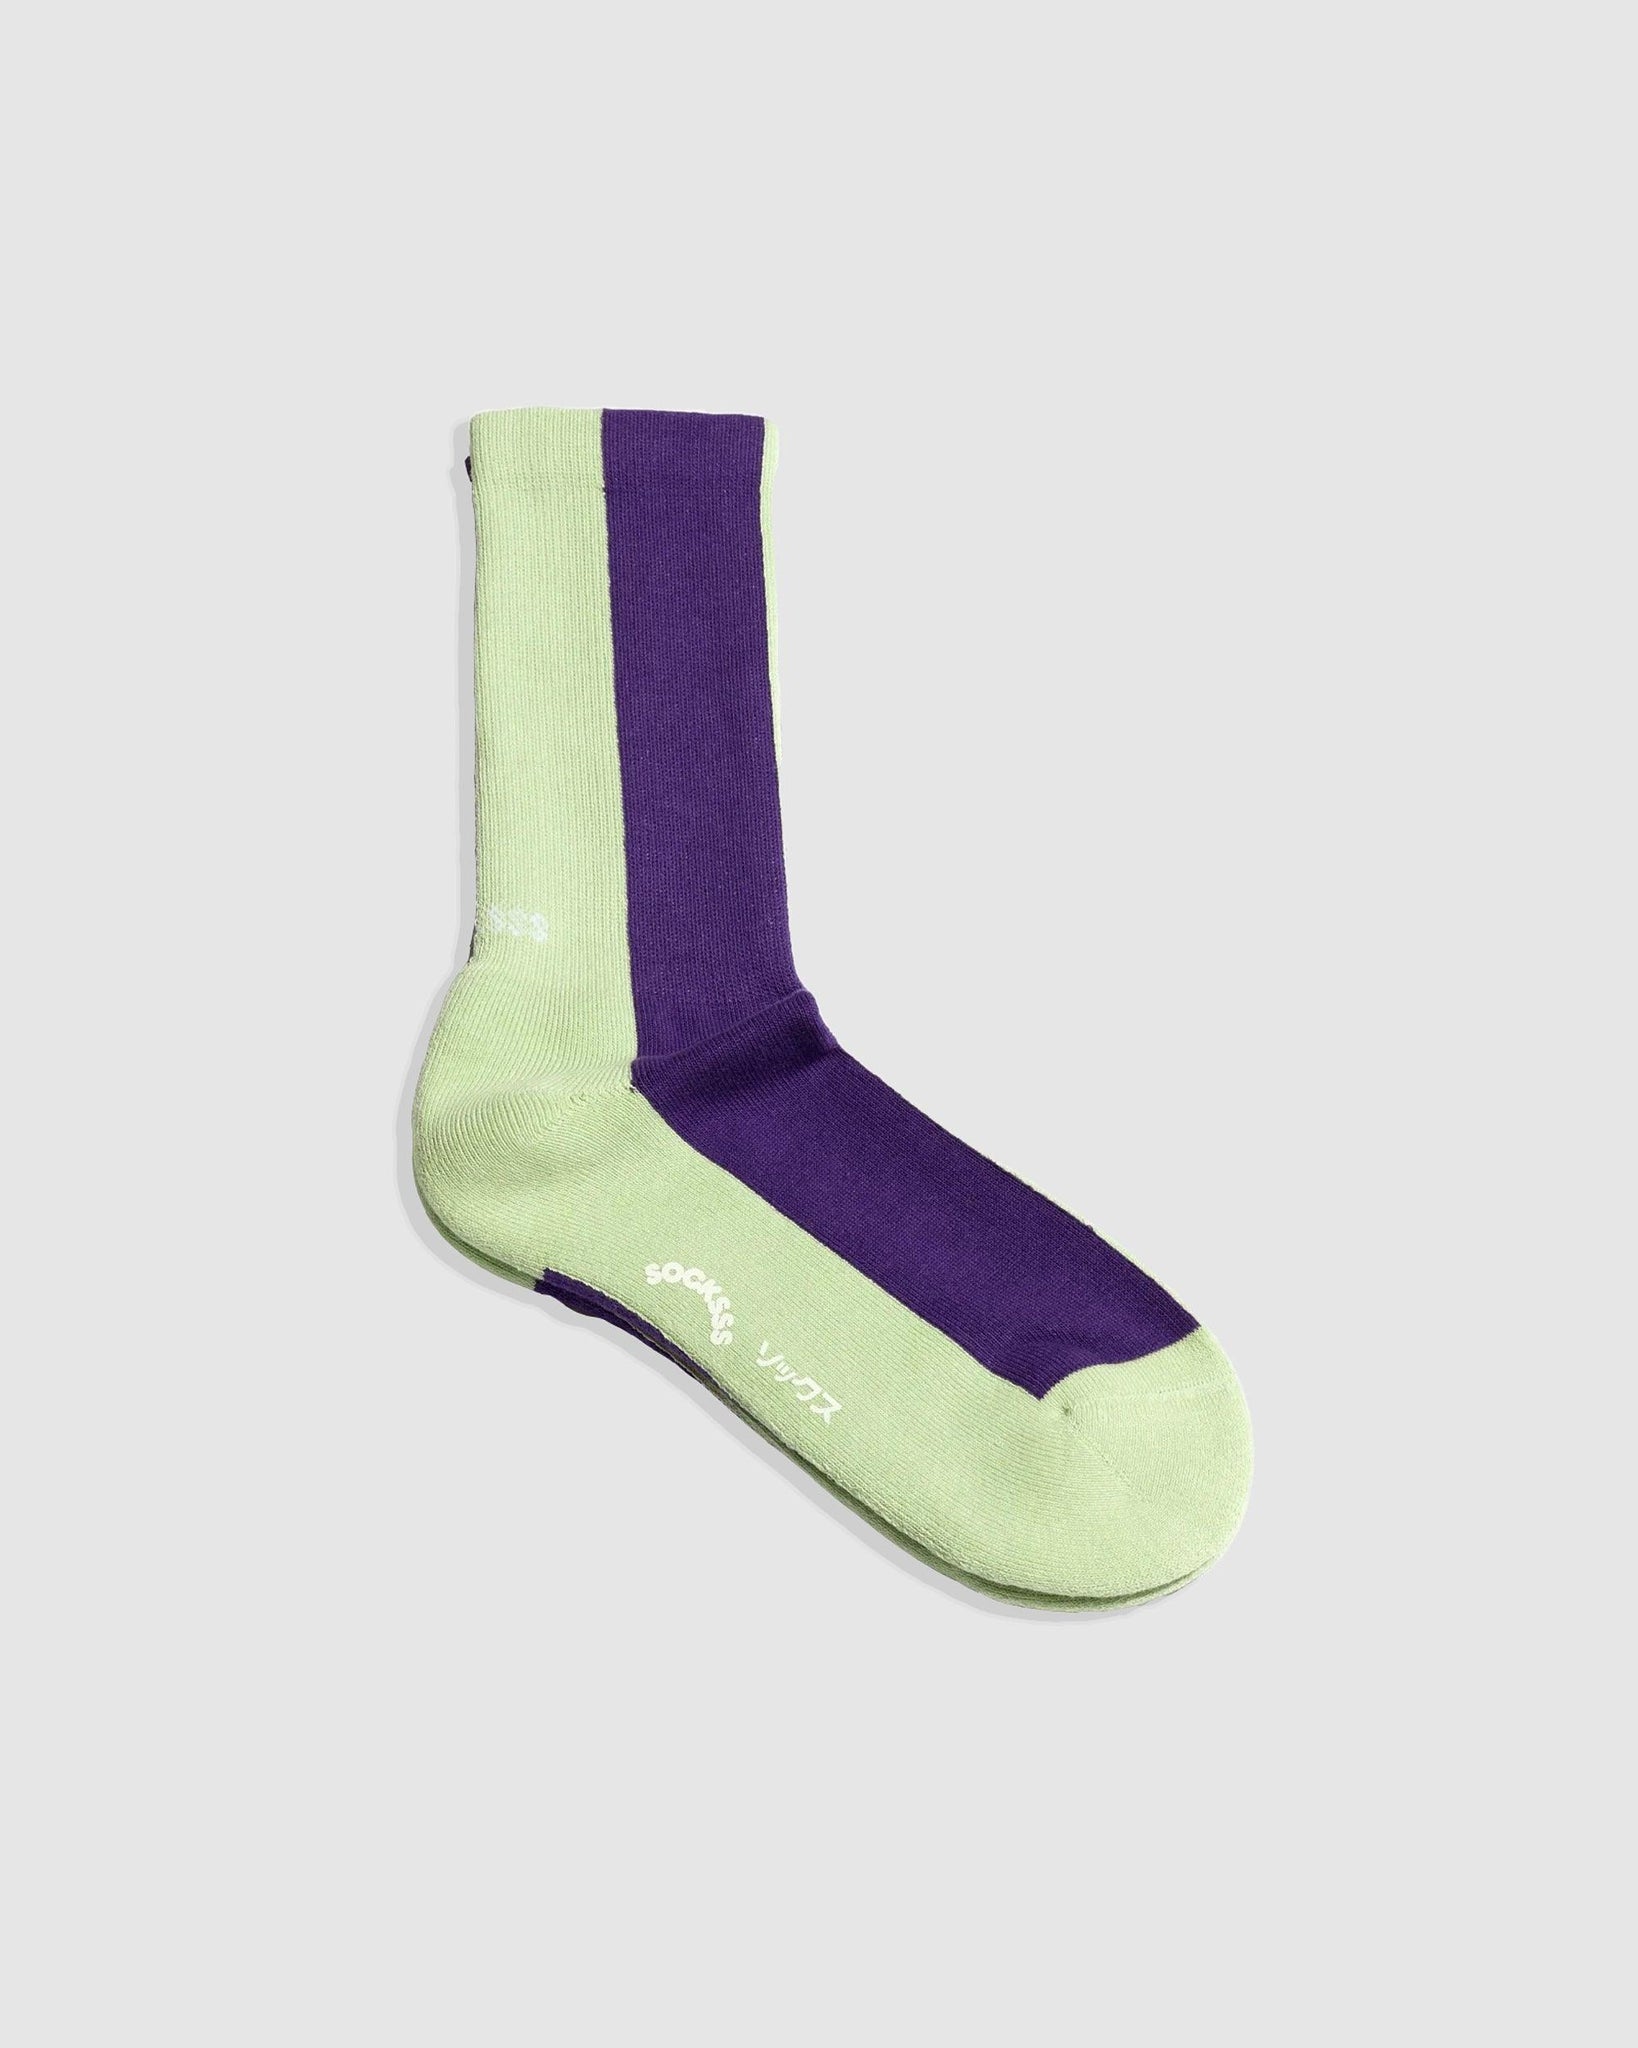 Violet Mint Socks - {{ collection.title }} - Chinatown Country Club 